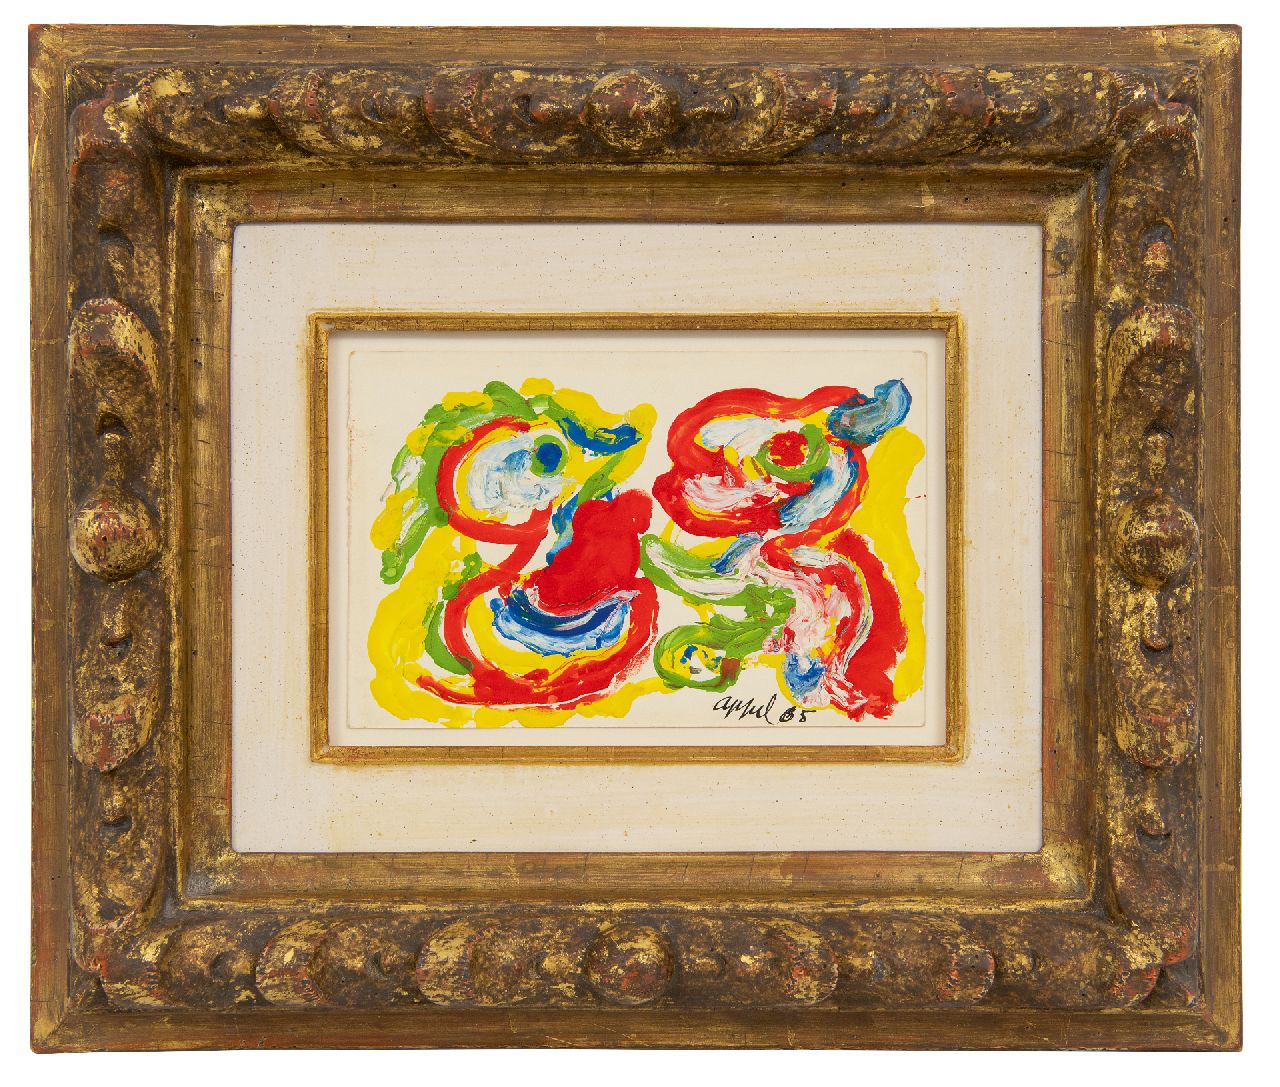 Appel C.K.  | Christiaan 'Karel' Appel | Watercolours and drawings offered for sale | Postcard to Simon Vinkenoog, gouache on paper 10.0 x 16.0 cm, signed l.r. and dated '65